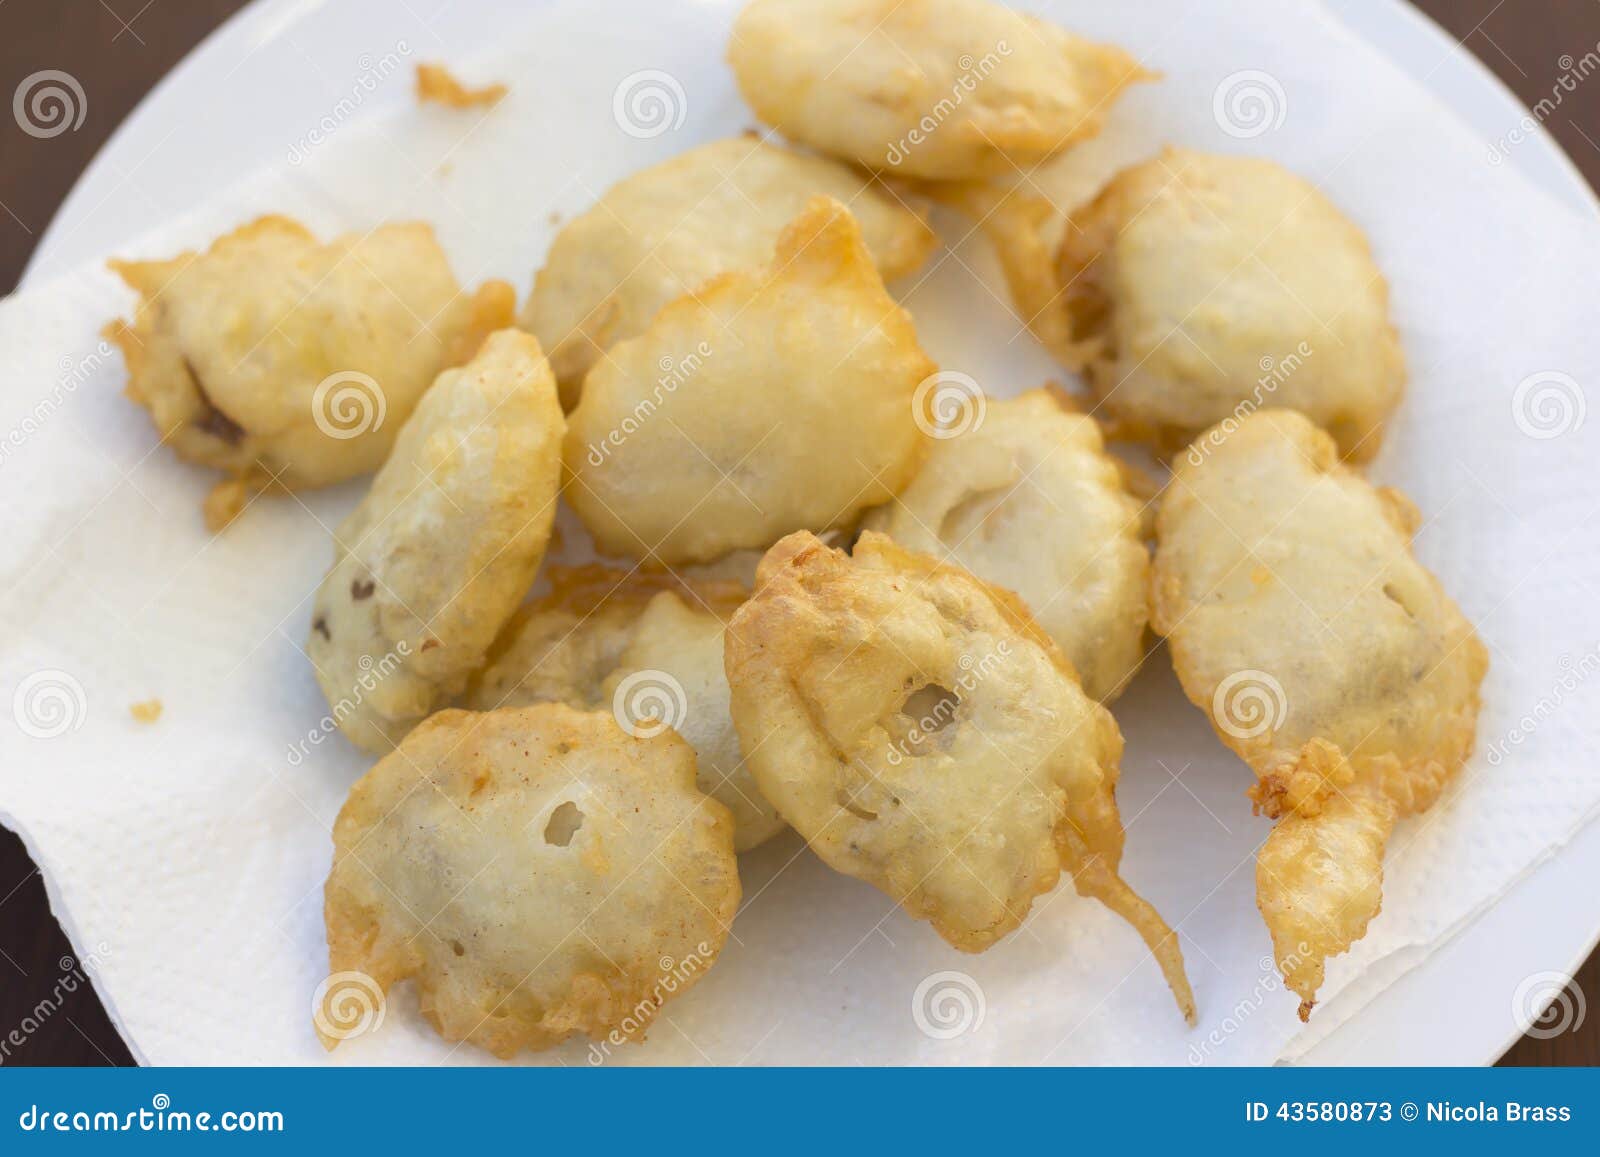 Plate Of Deep Fried Battered Bluff Oysters Stock Photo - Image: 43580873